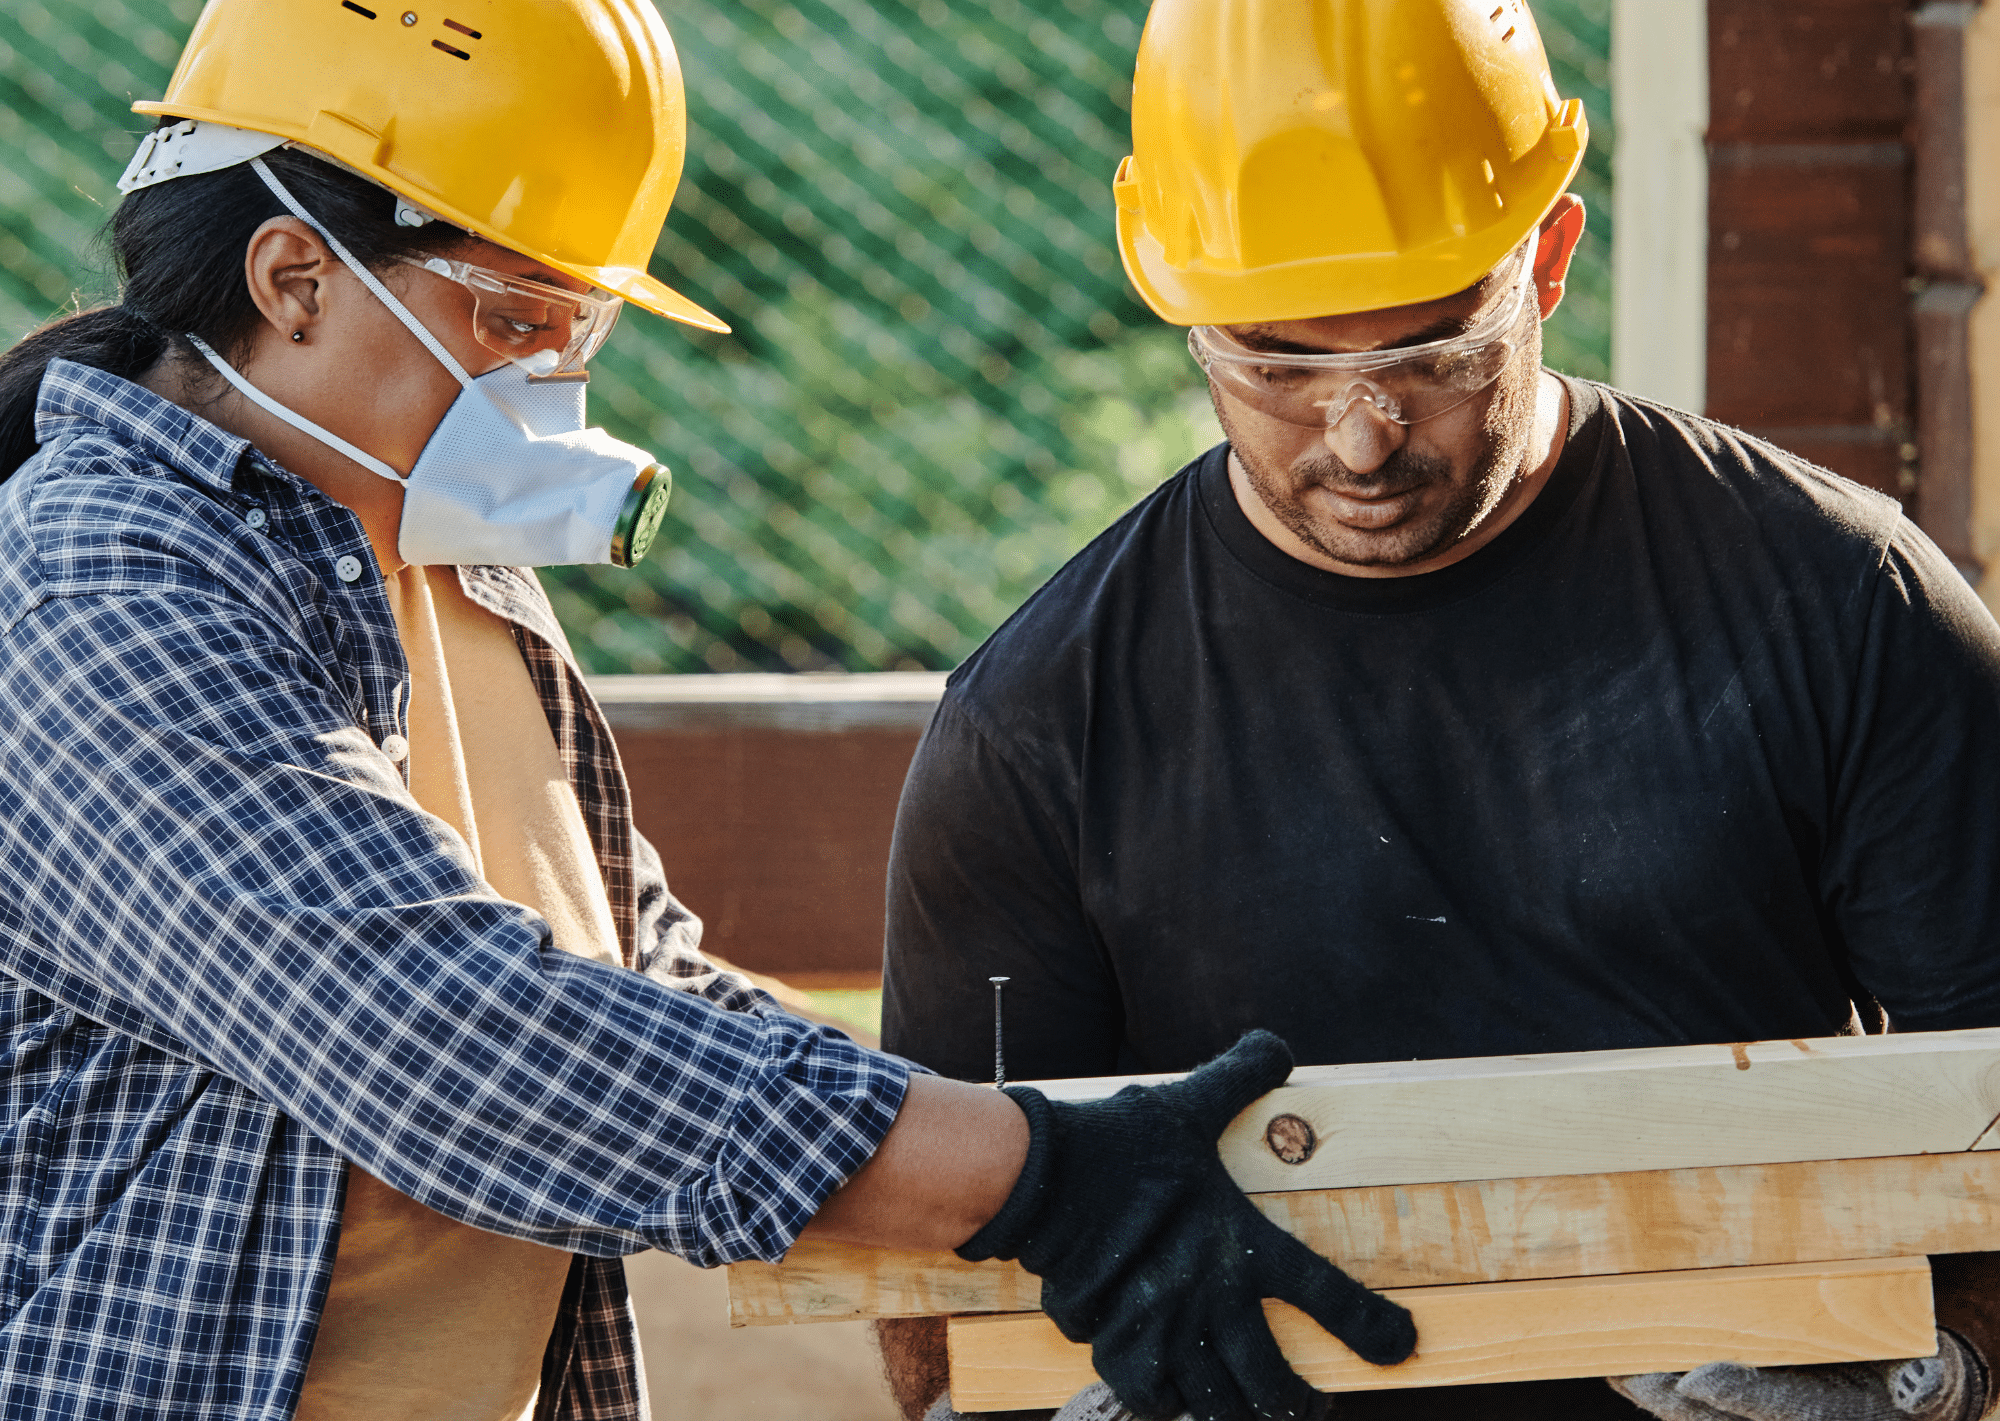 What skills are needed for a career in construction?